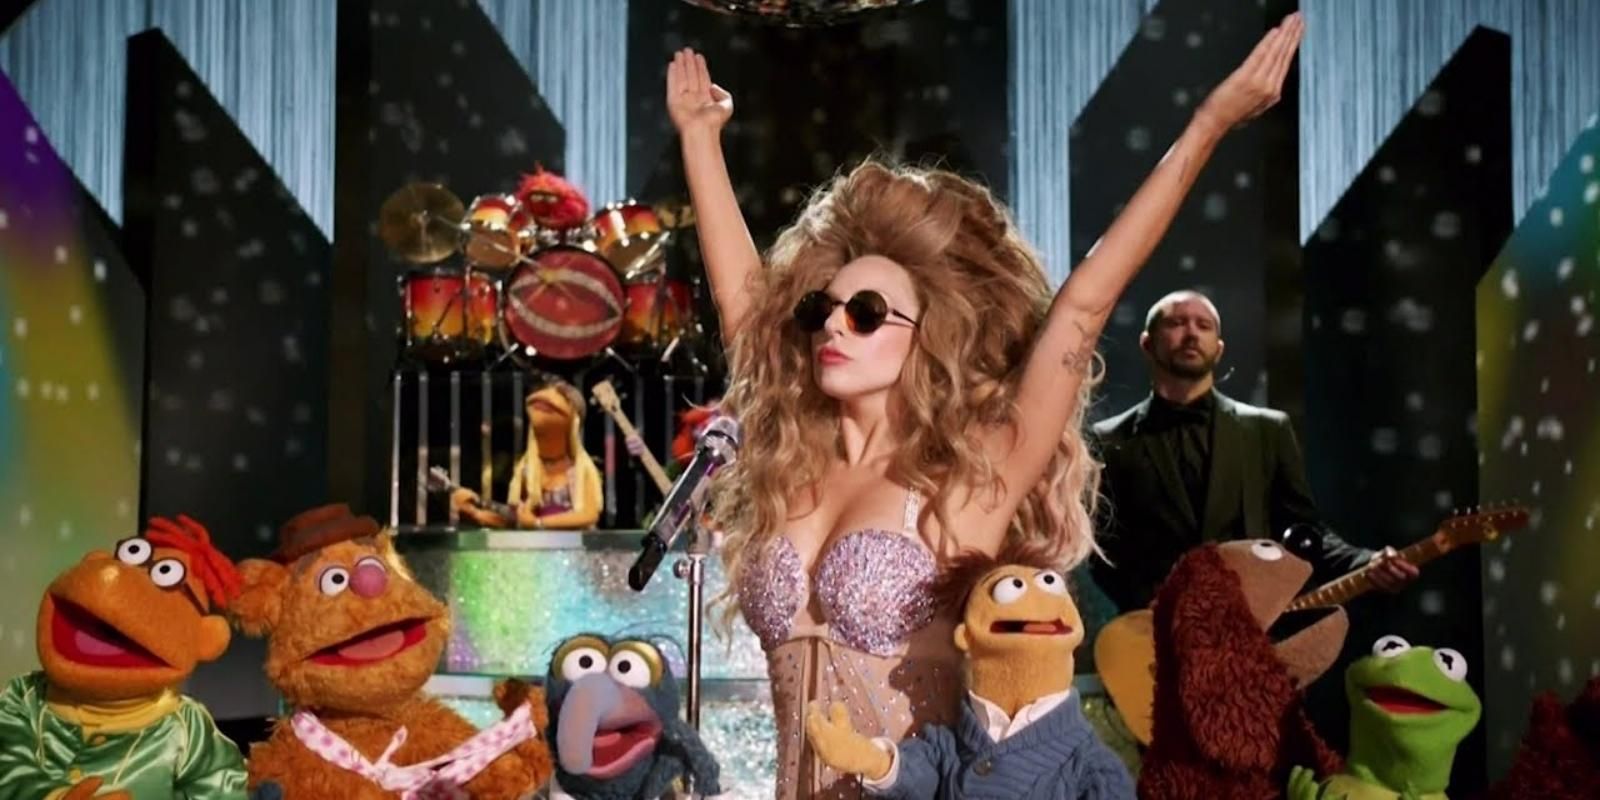 Lady Gaga surrounded by the Muppets in Lady Gaga And The Muppets Holiday Spectacular